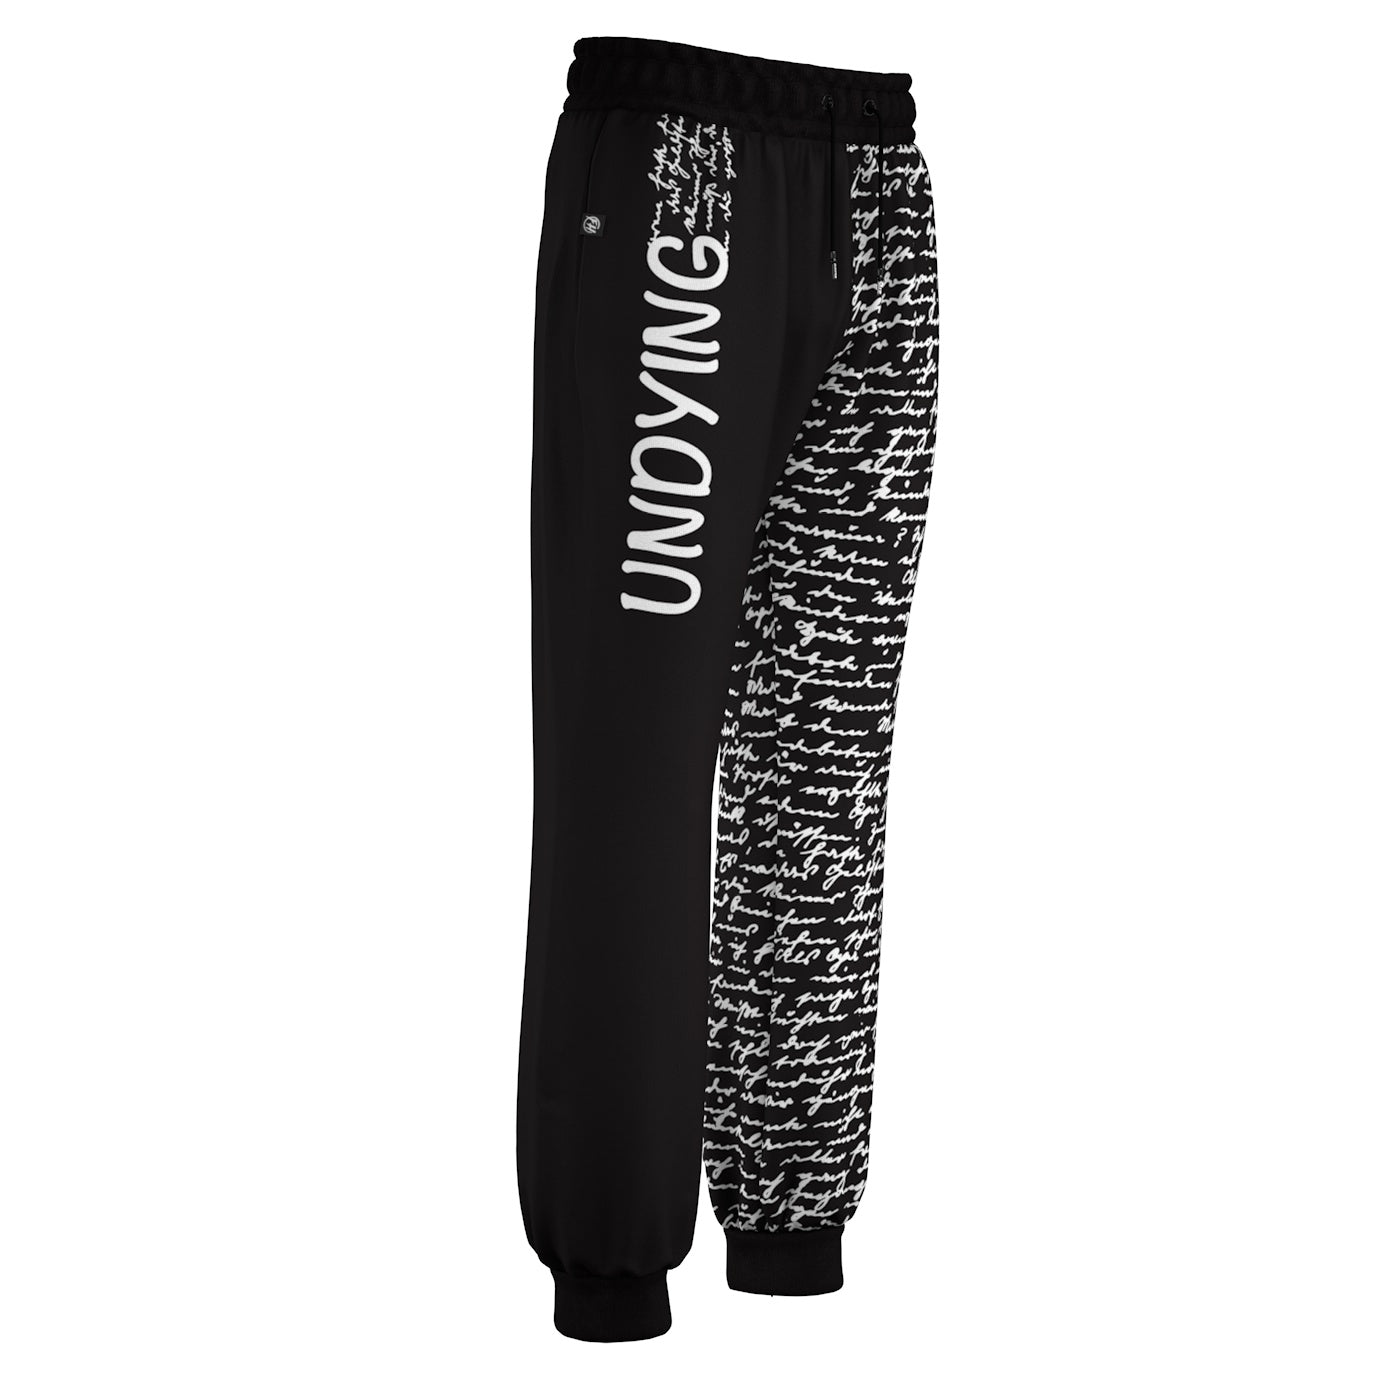 Undying Sweatpants